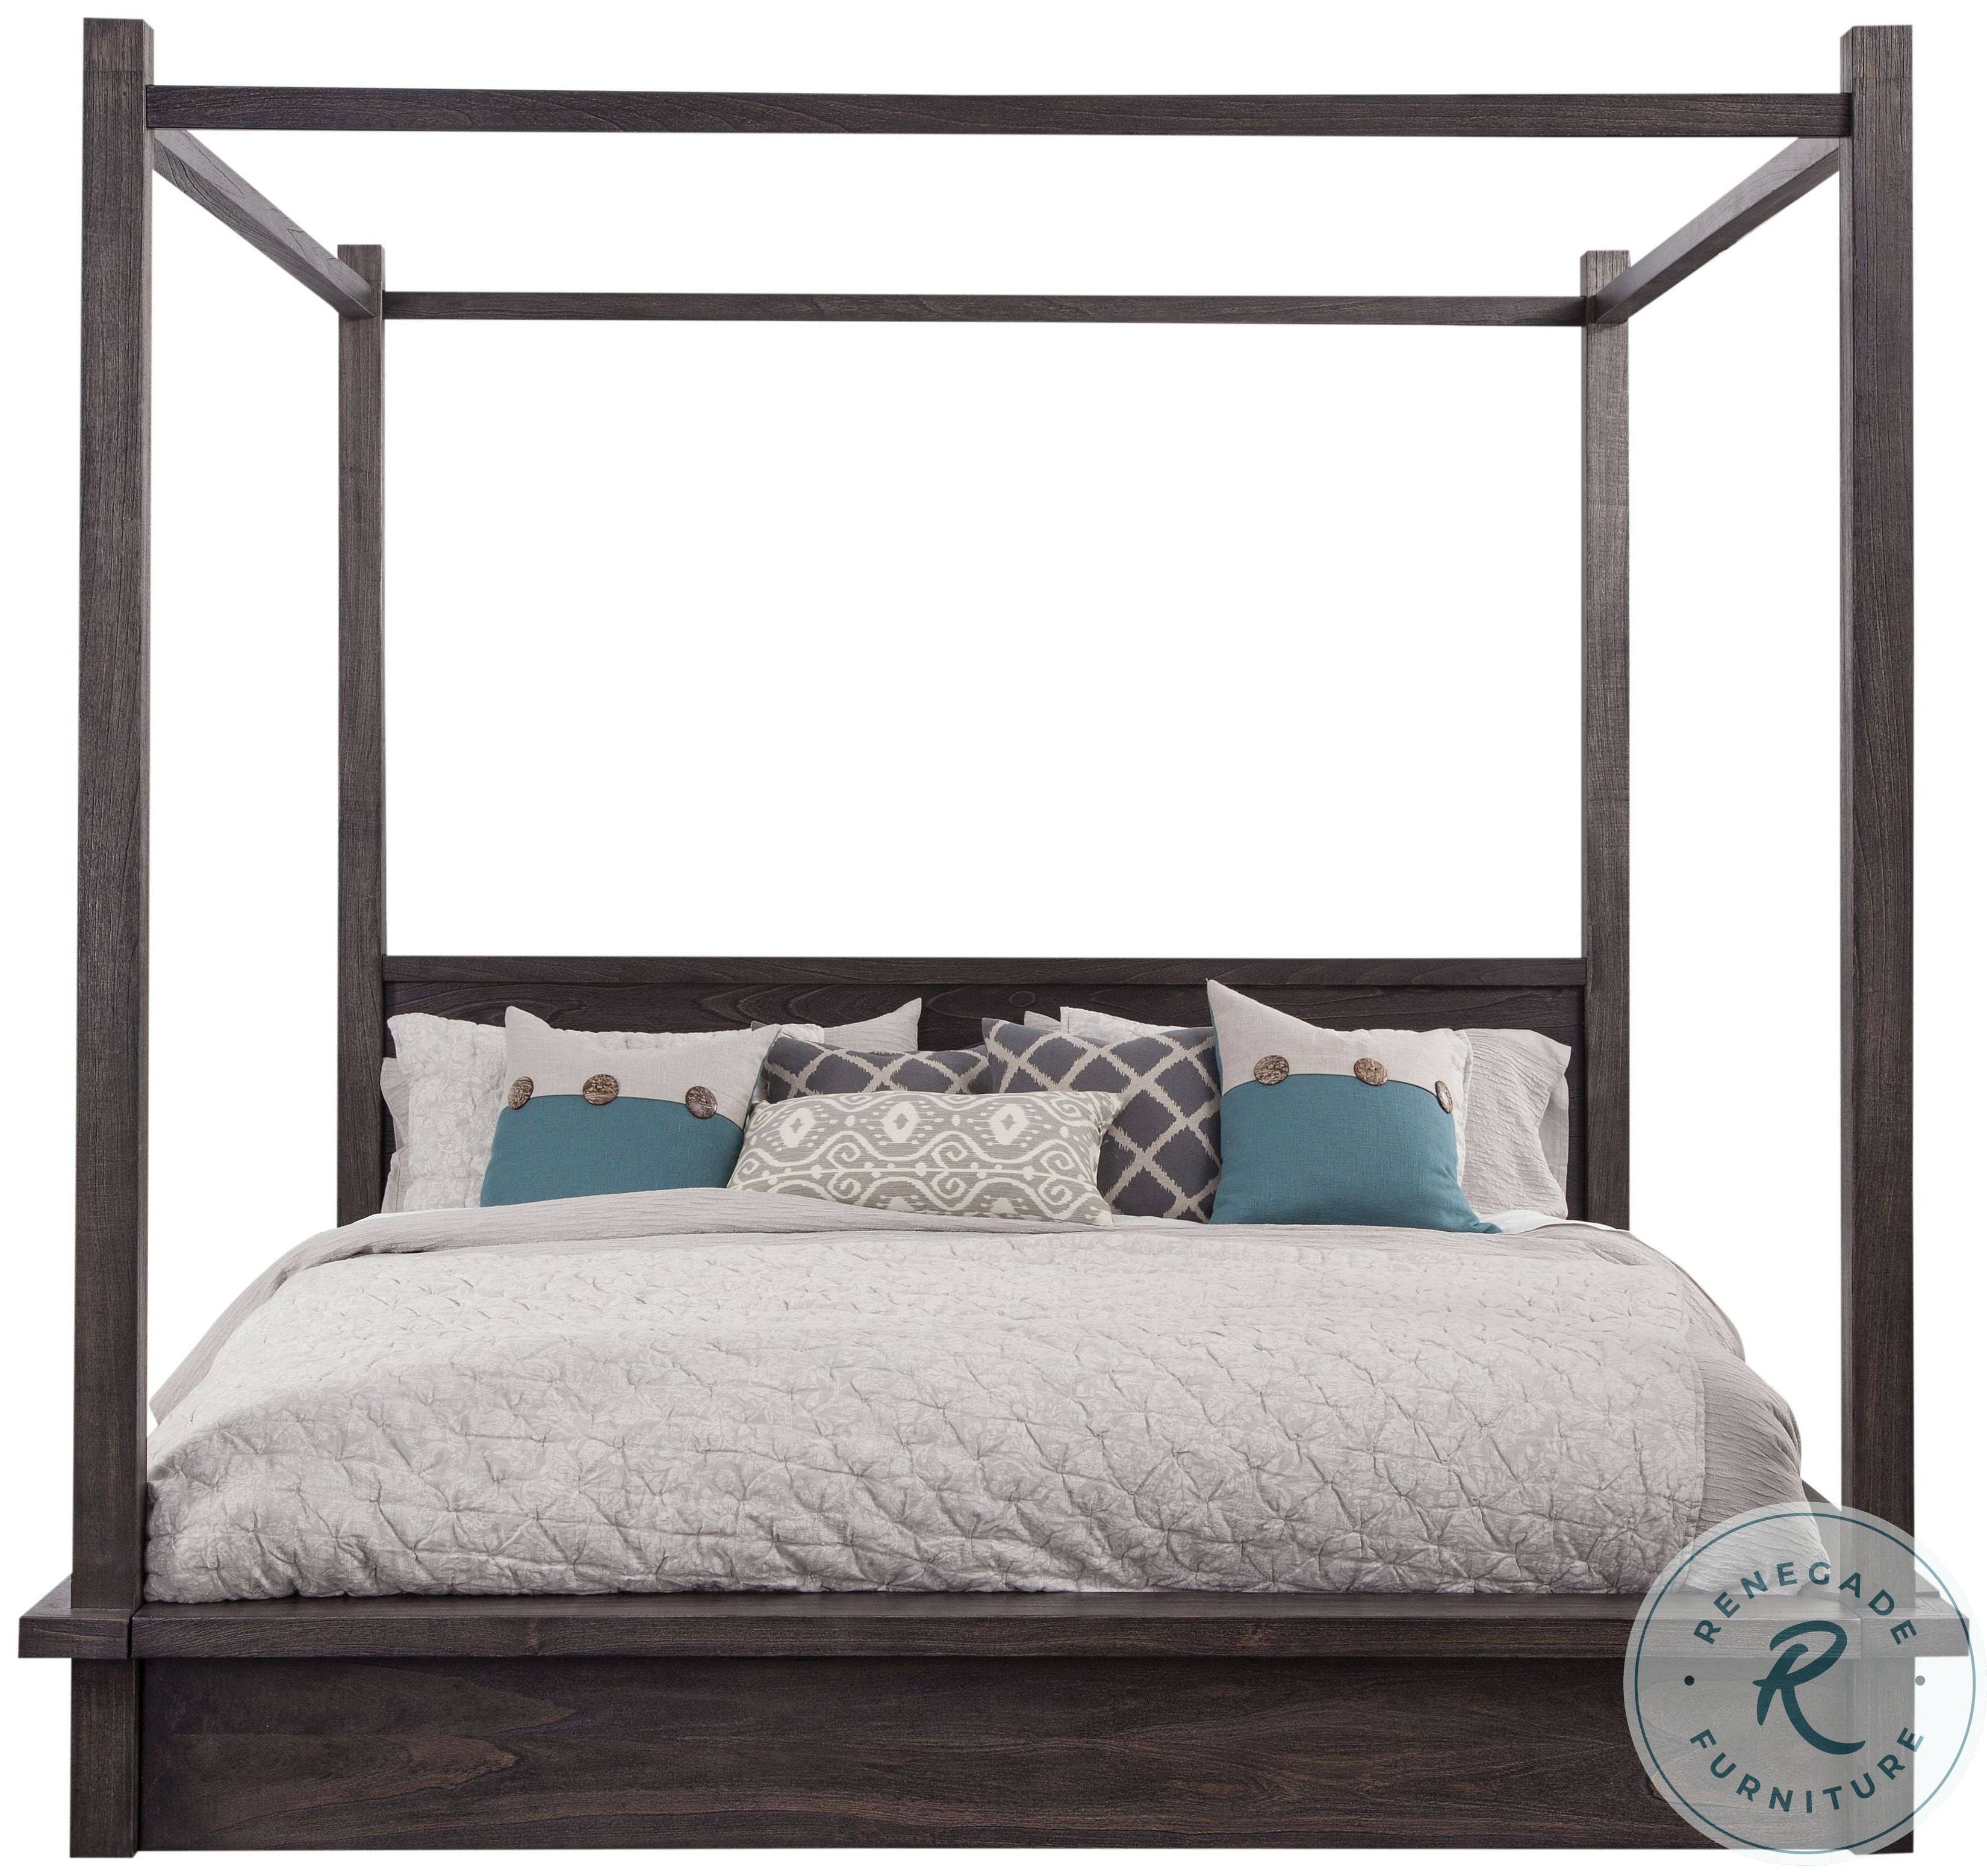 Sandblasted Mindi King Size Canopy Bed Frame in Brown By: Alabama Beds